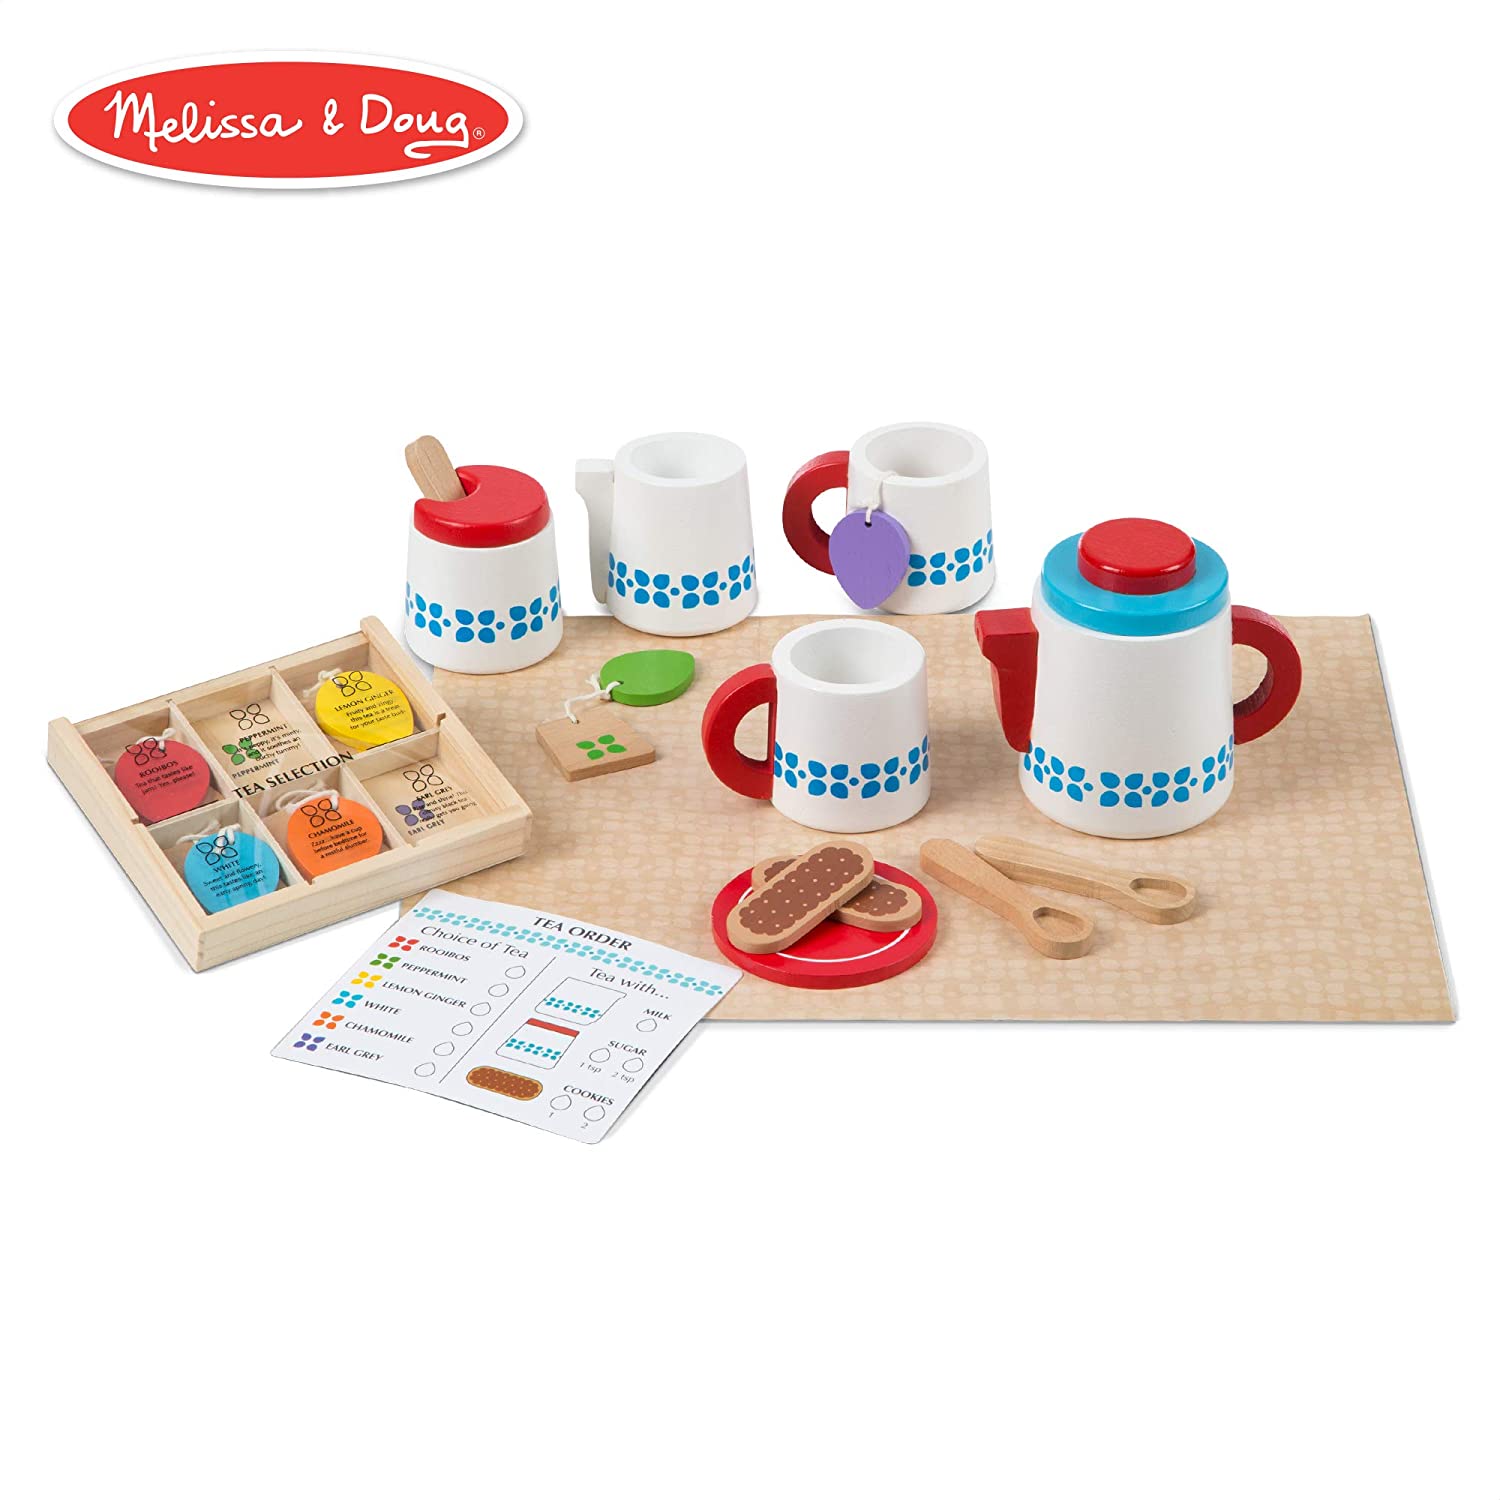 9 Best Kids Tea Sets 2023 - Buying Guide & Reviews 8